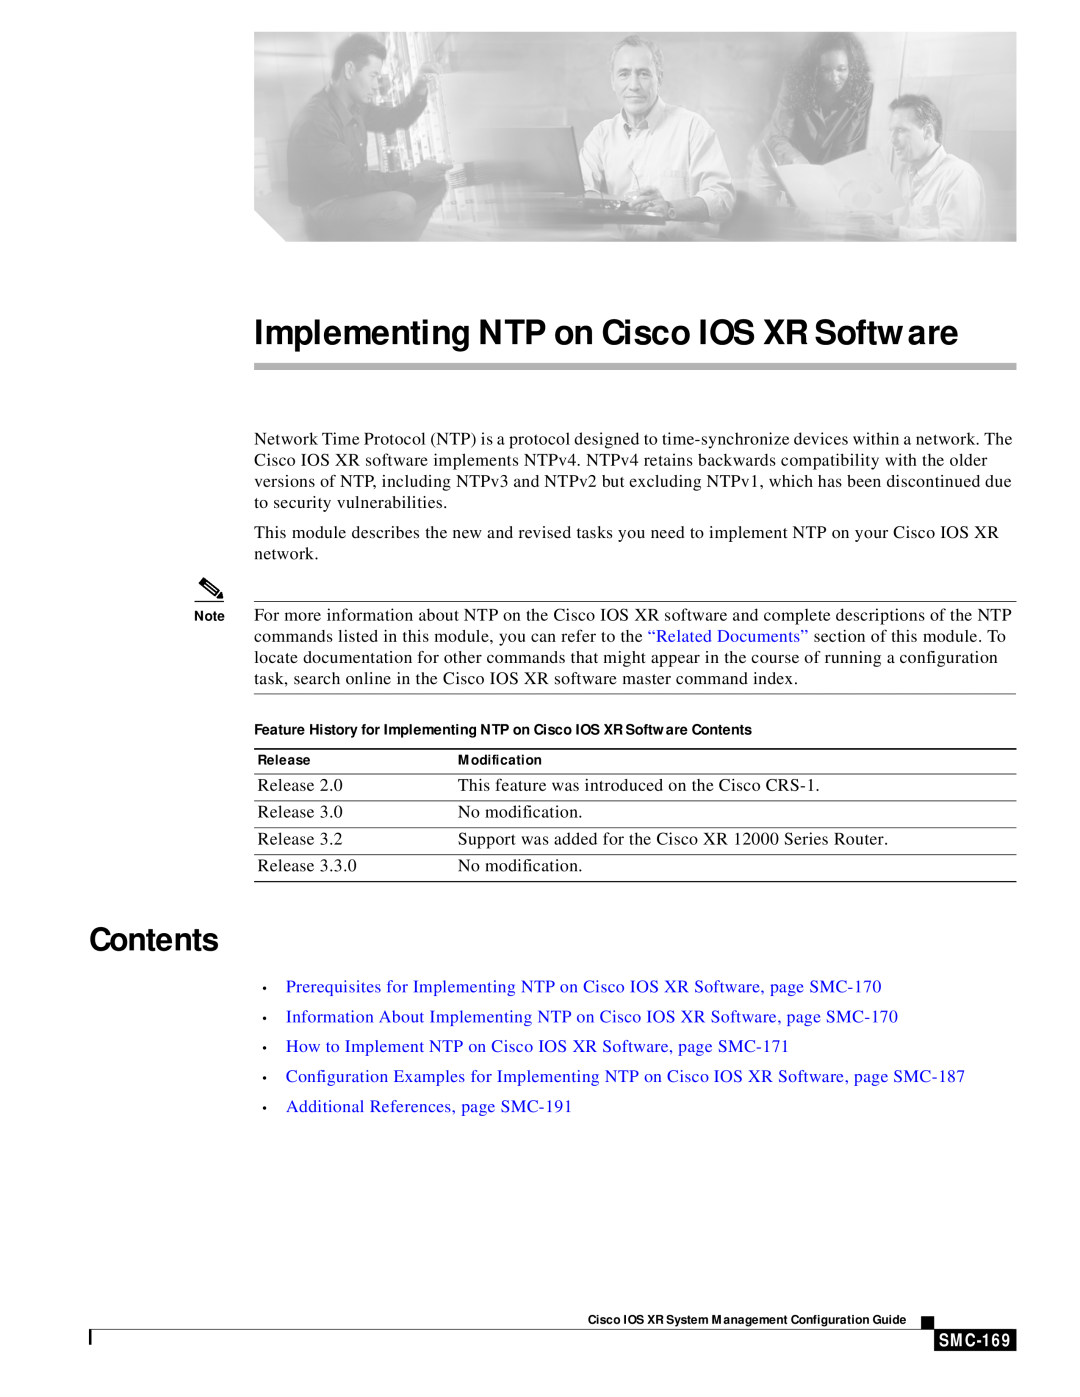 Cisco Systems SMC-169 manual Contents, Implementing NTP on Cisco IOS XR Software 